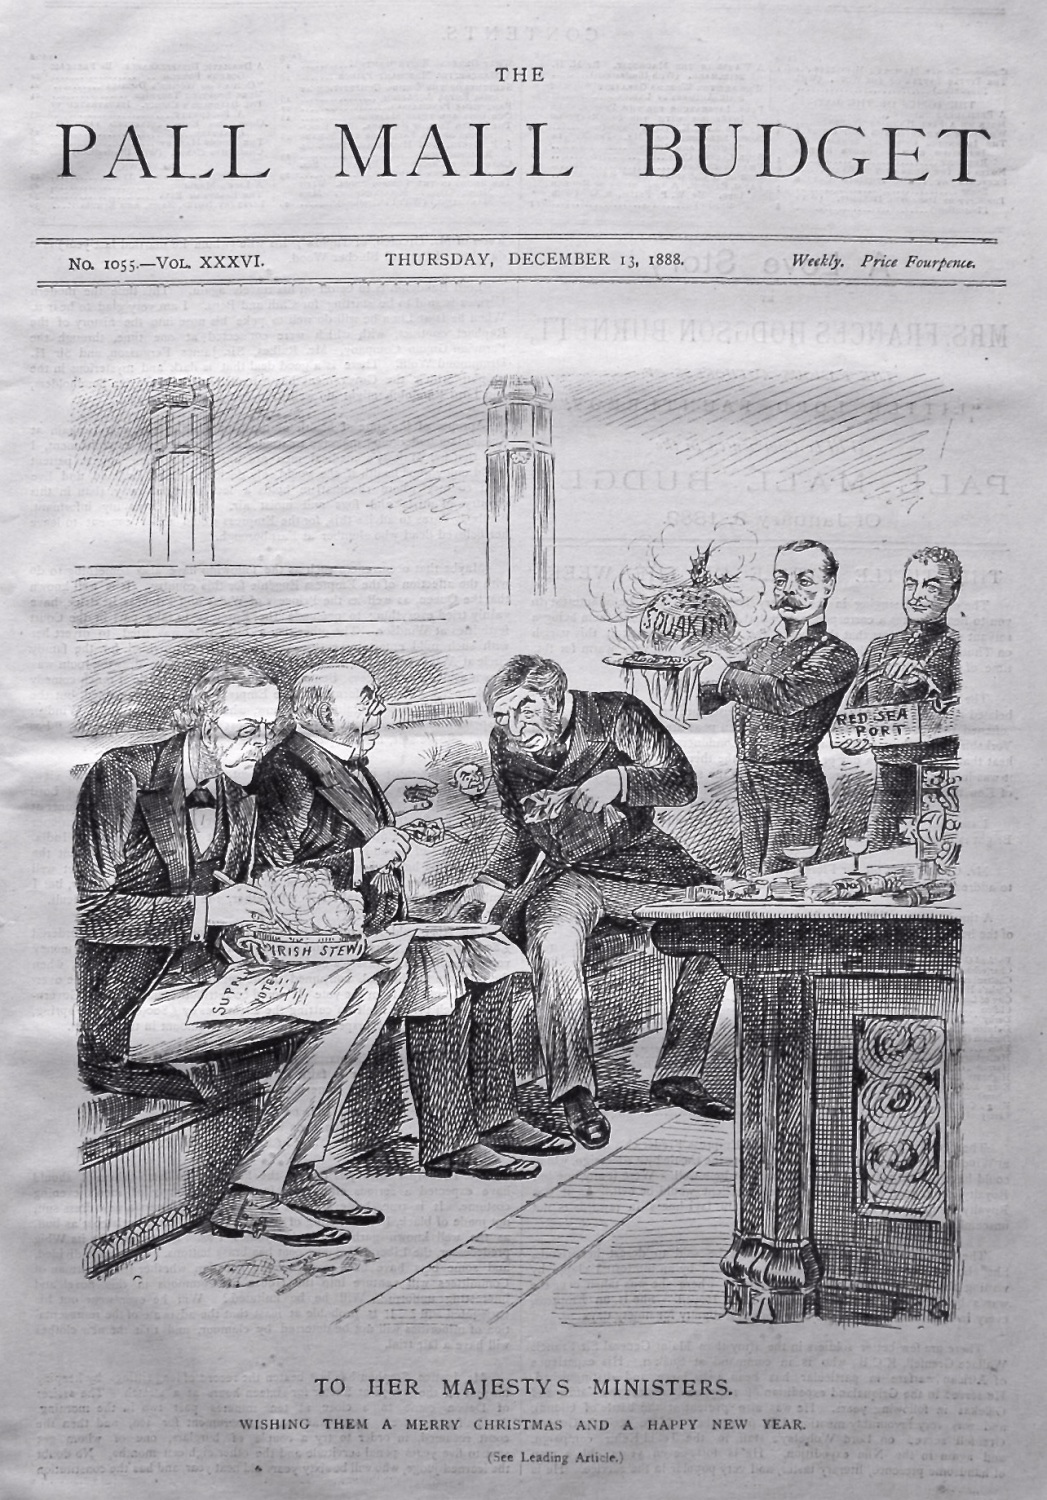 The Pall Mall Budget. (Front Page) December 13th, 1888.